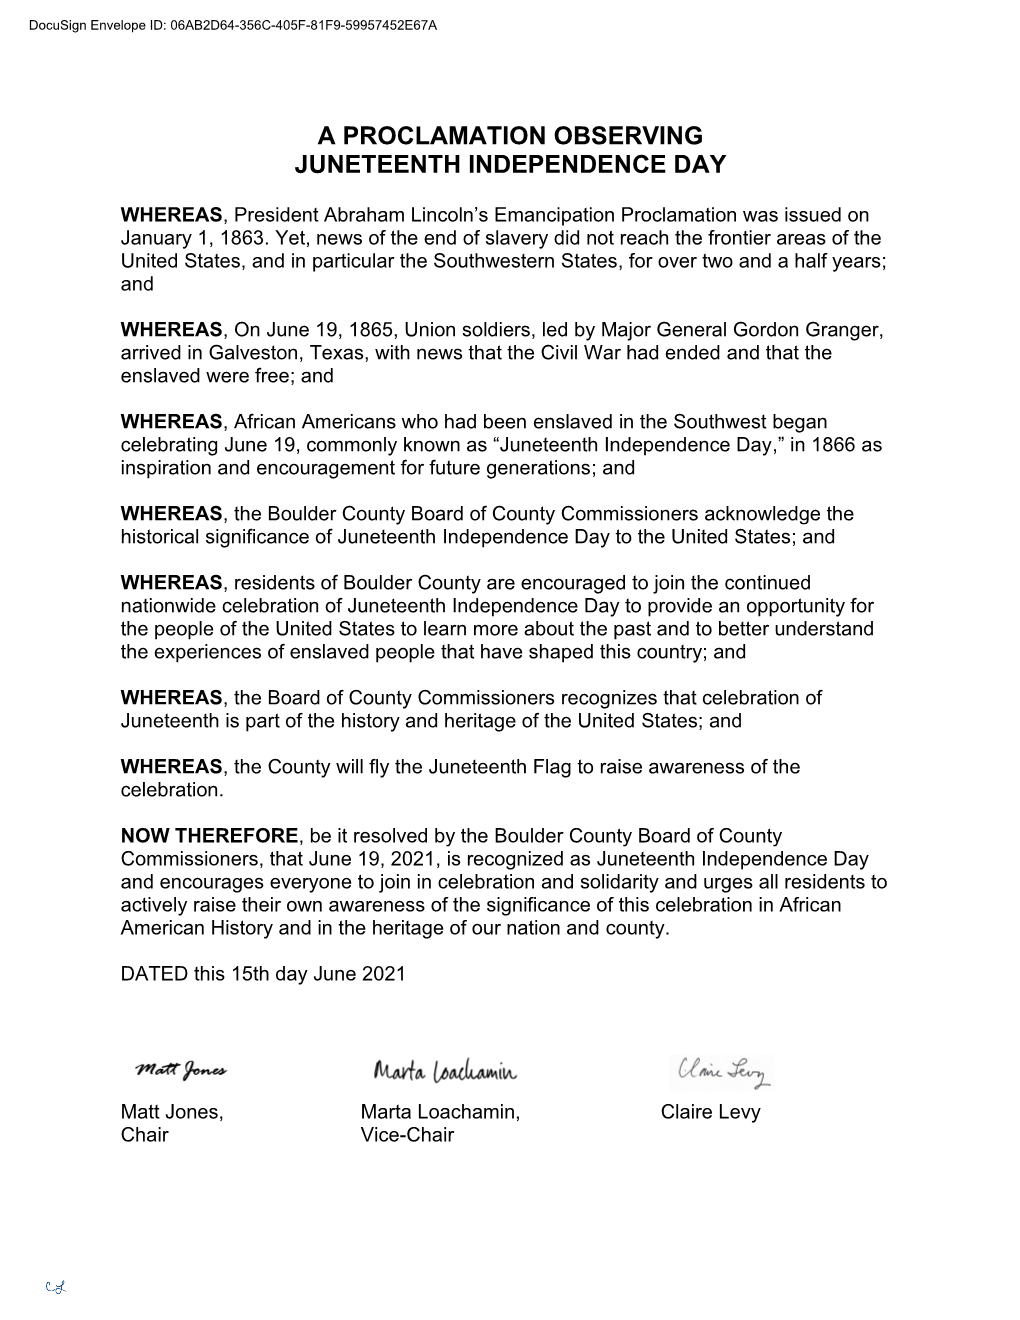 A Proclamation Observing Juneteenth Independence Day